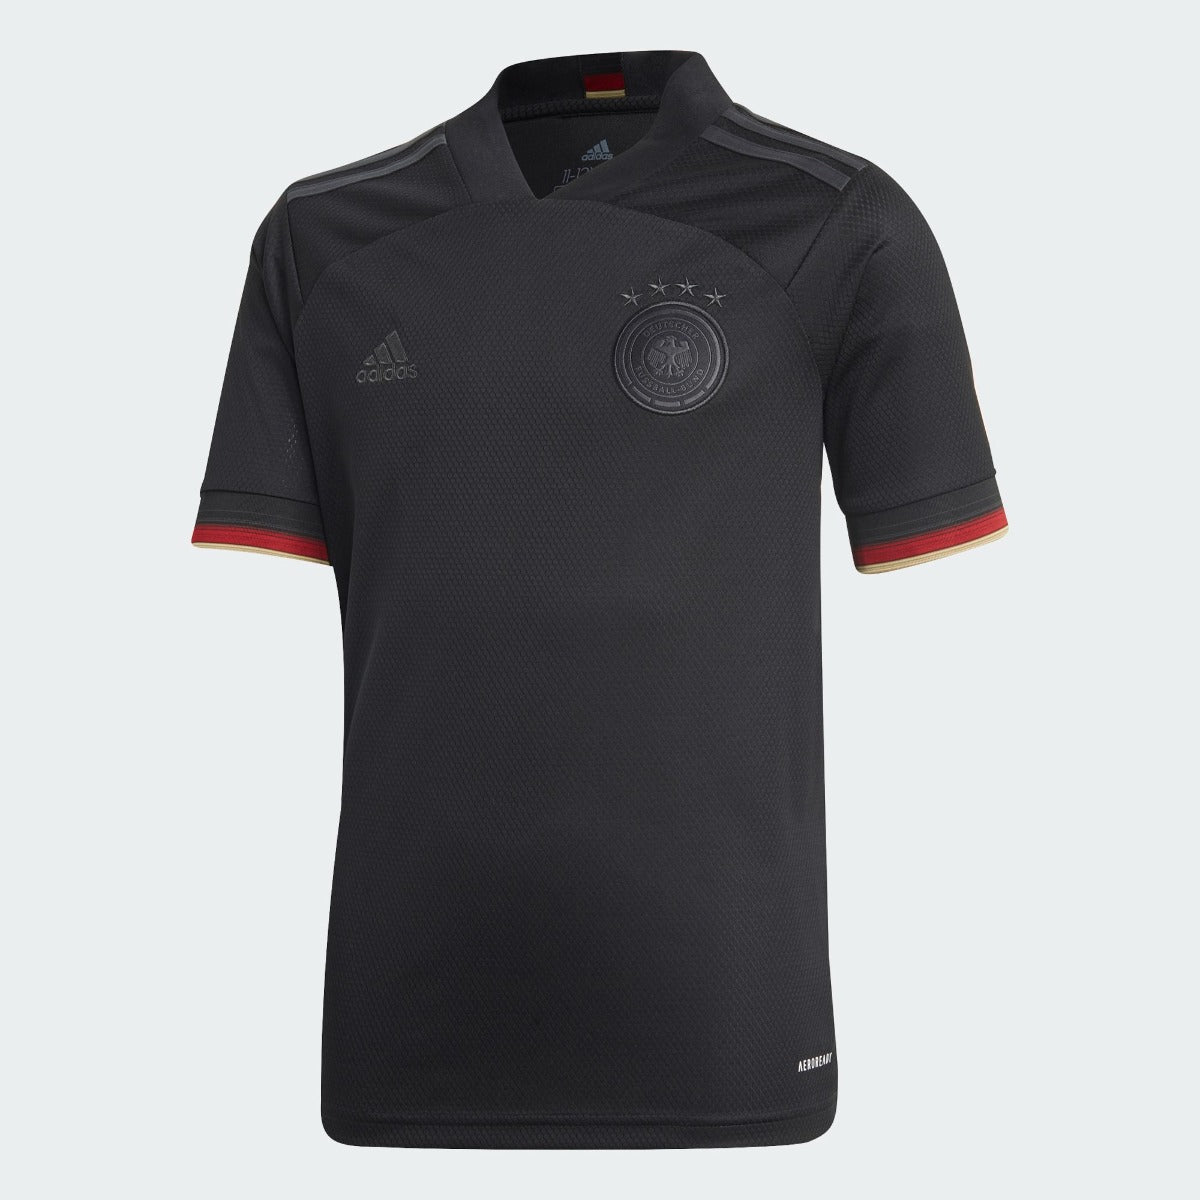 adidas 2020-21 Germany Away YOUTH Jersey - Black (Front)